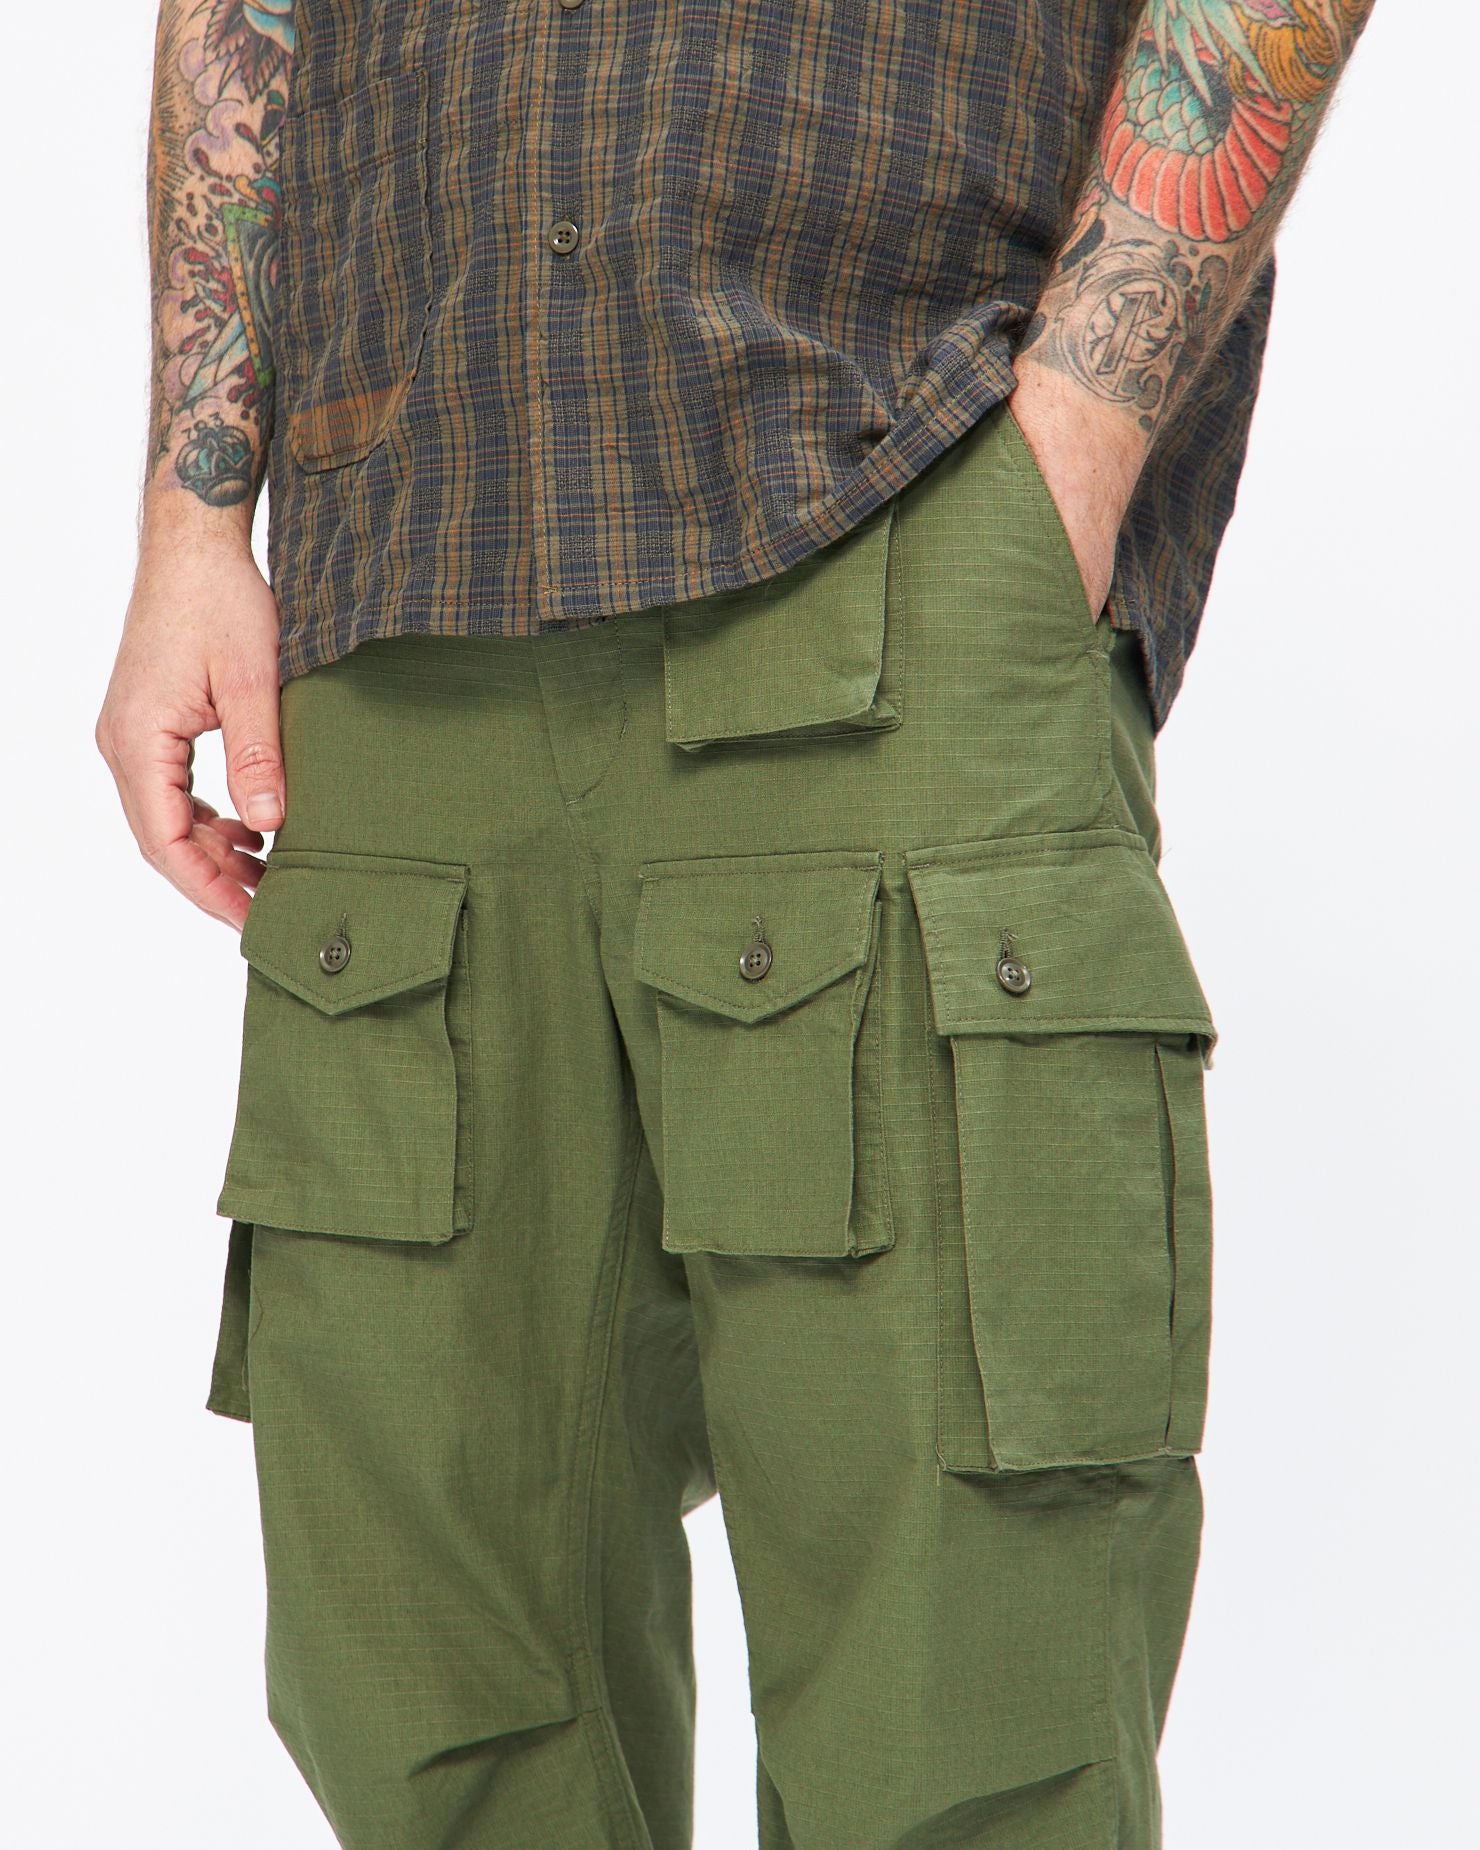 FA Pant in Olive Cotton Ripstop